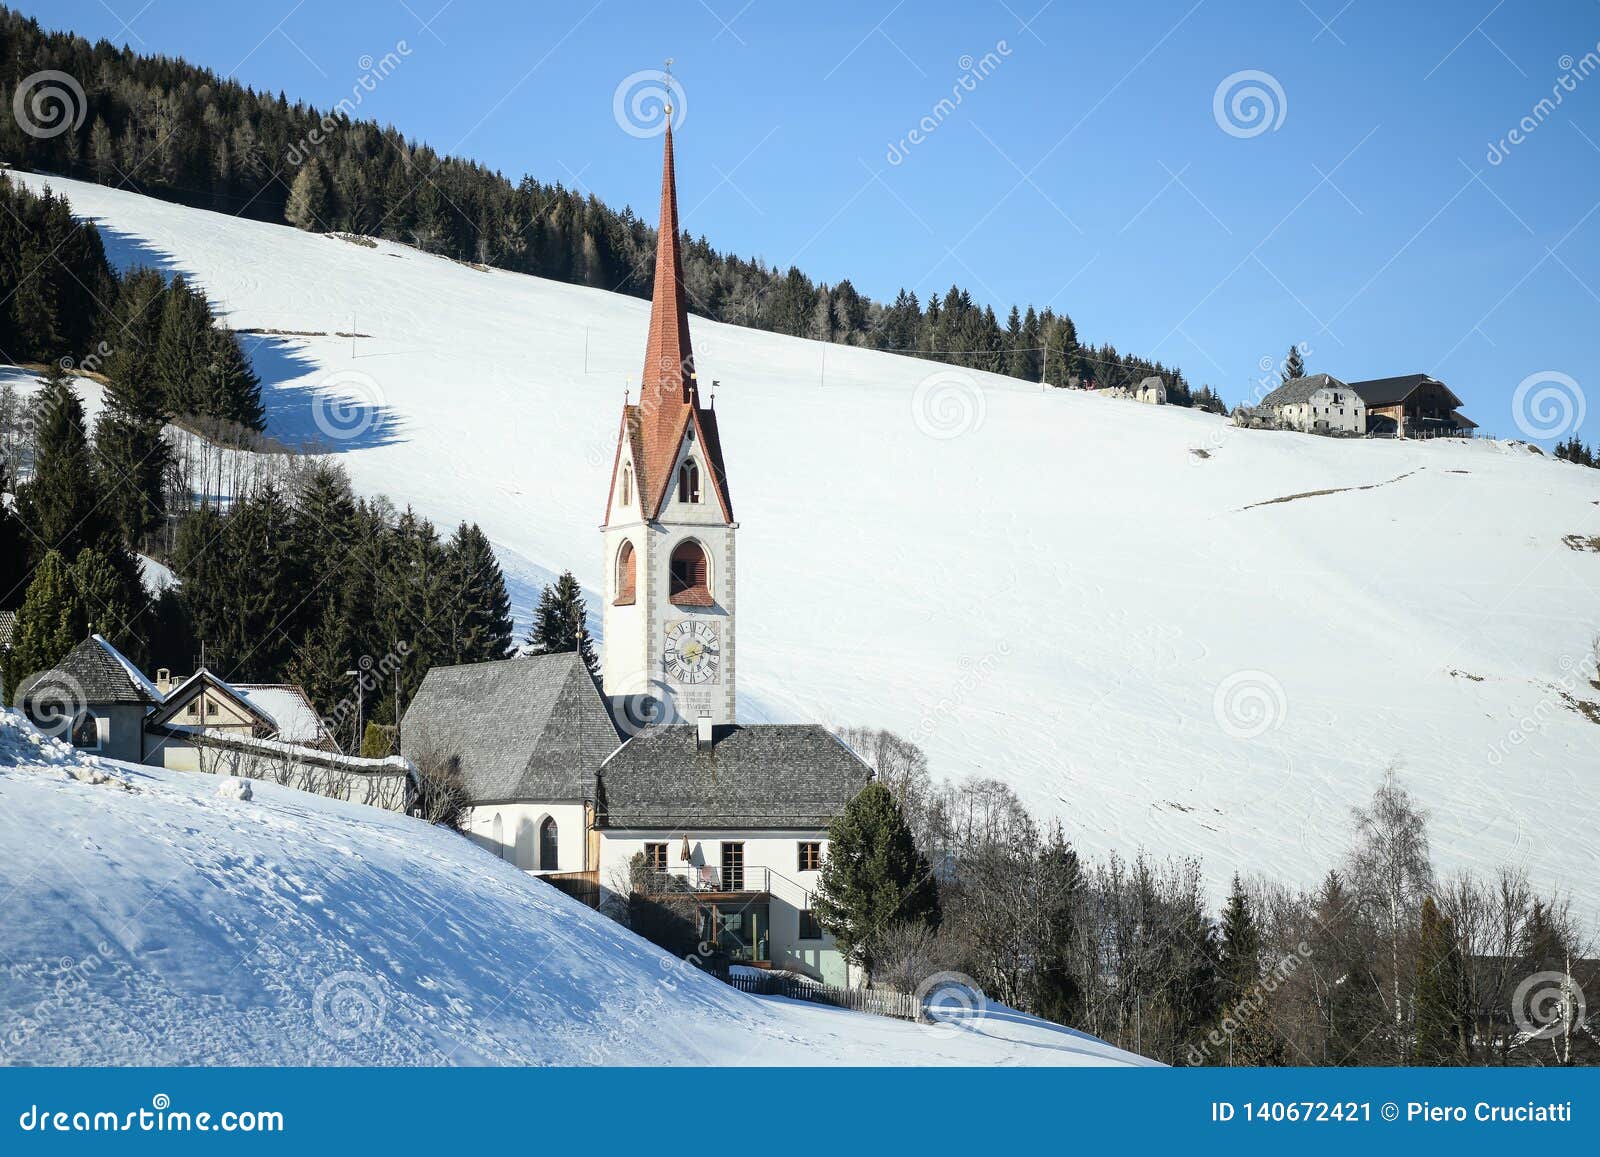 catholic church in the italian dolomites in wintertime with snow.